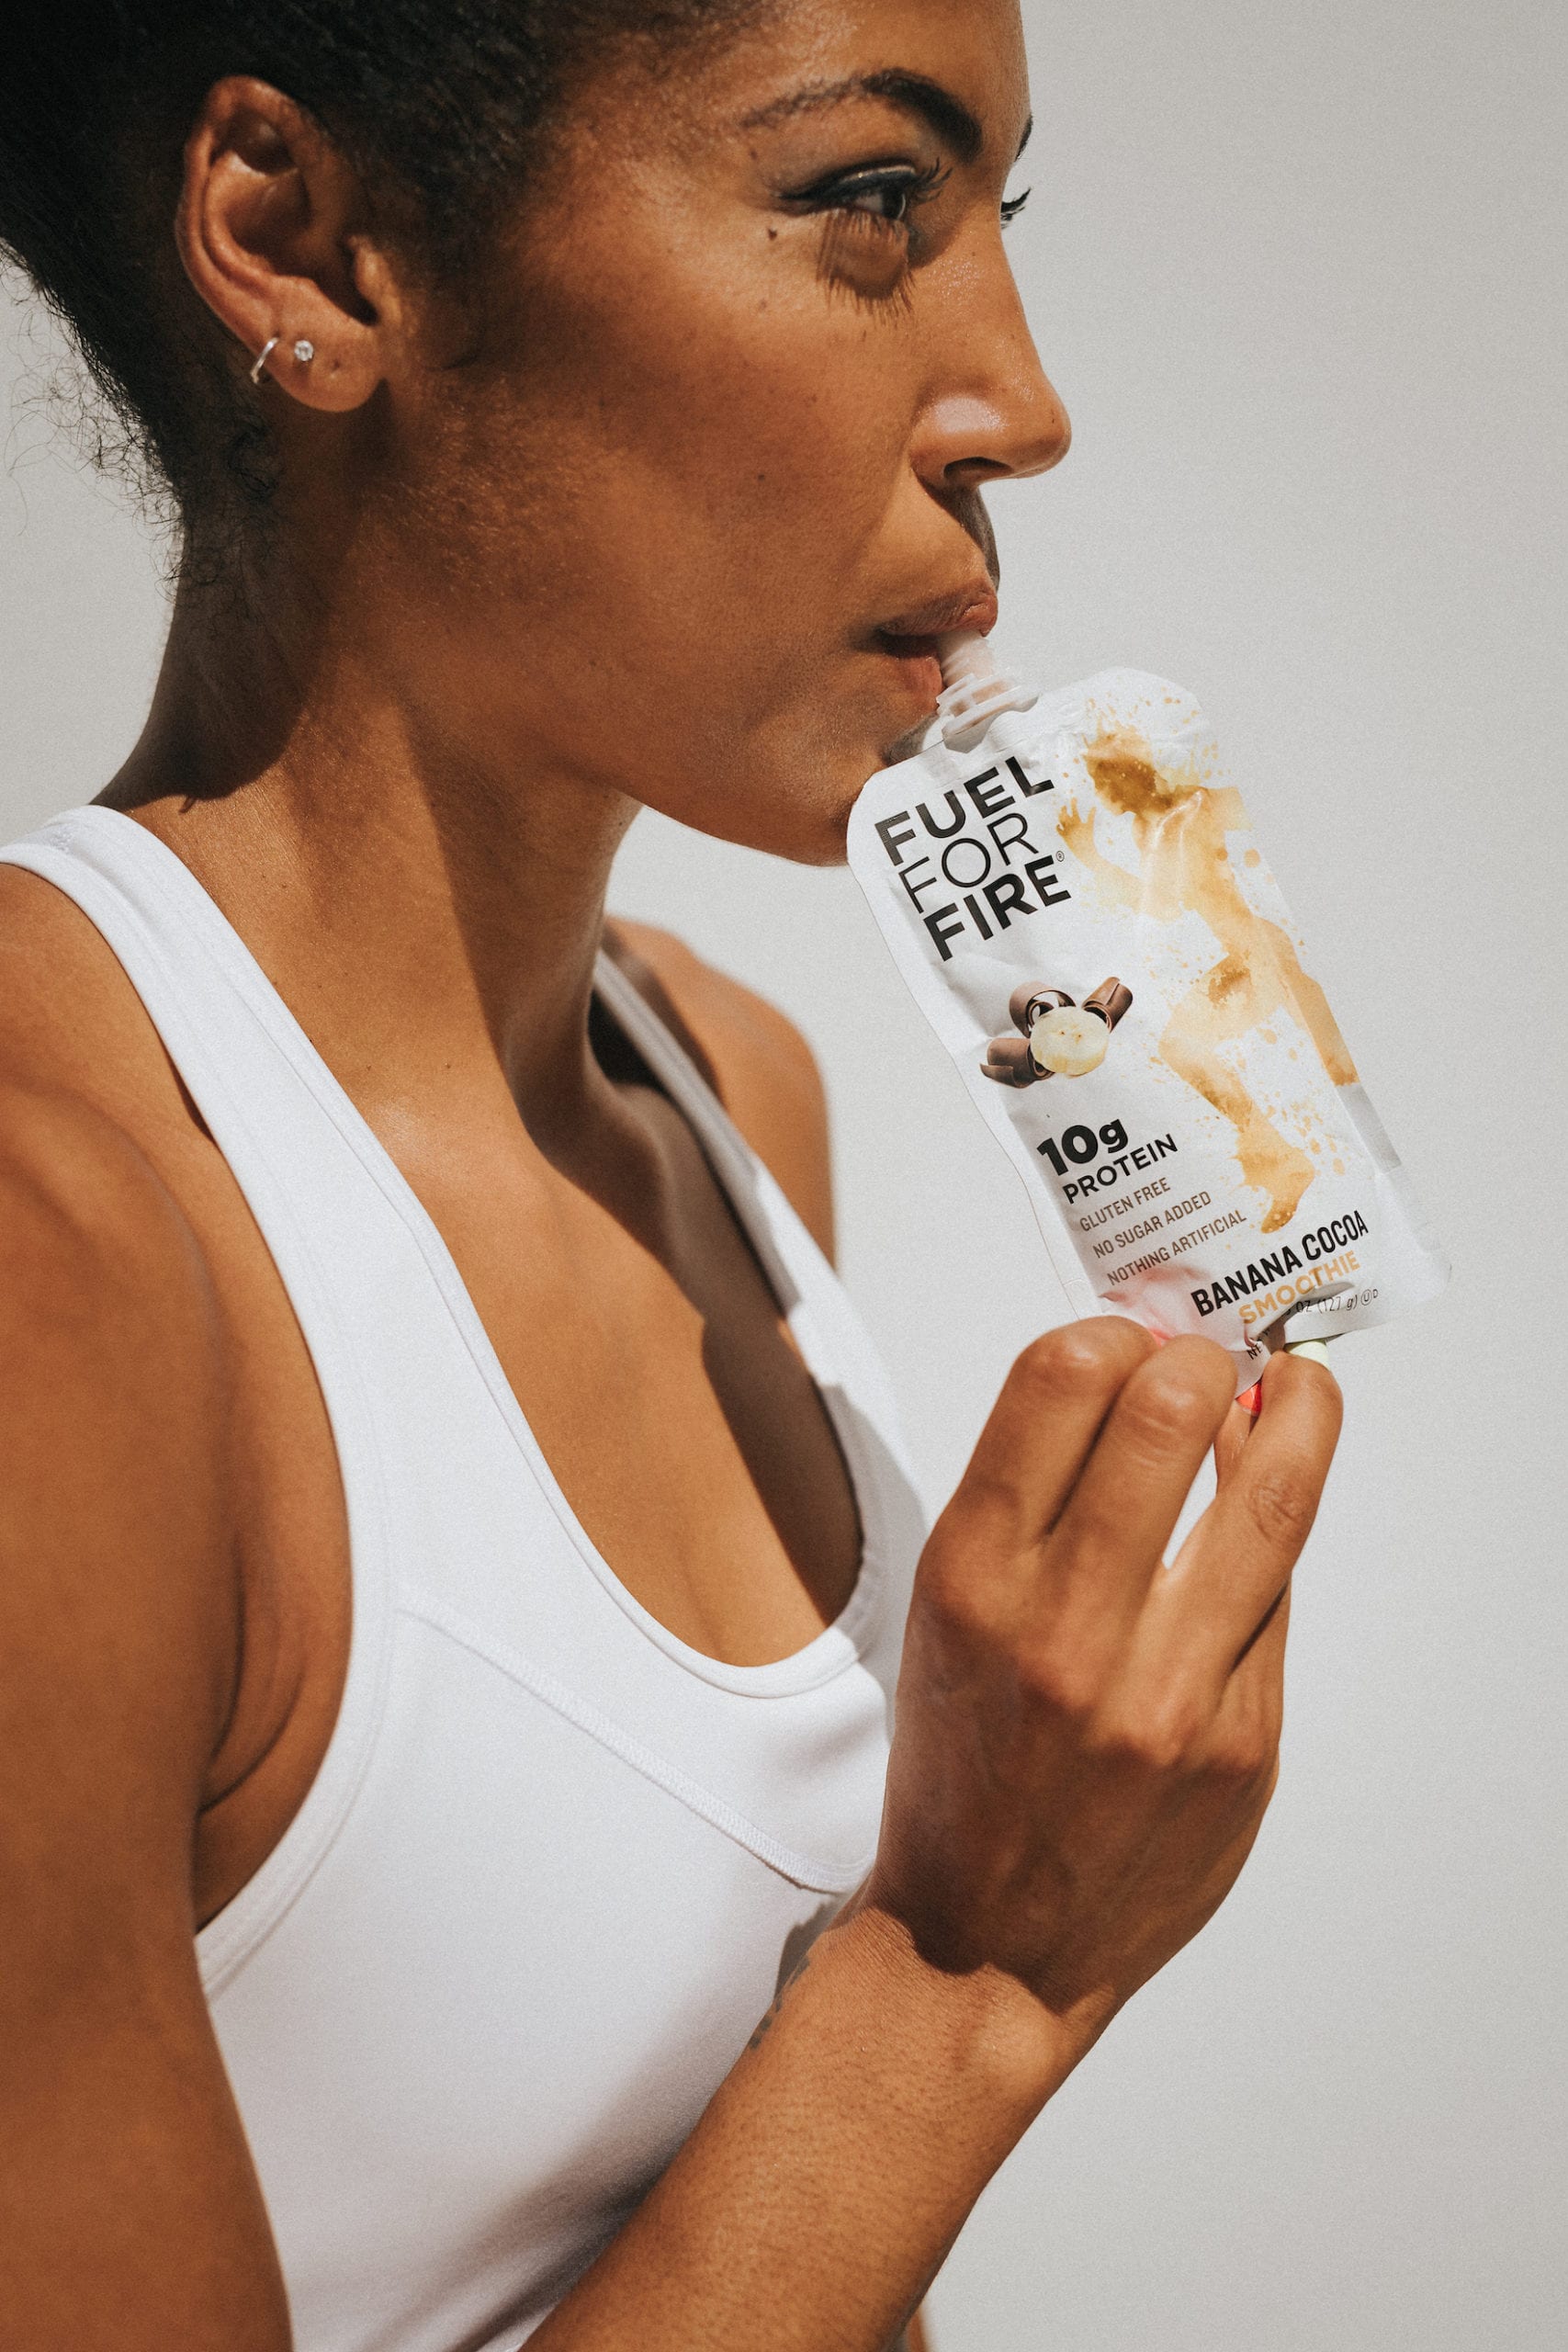 Karelle Edwards side profile closeup headshot of her drinking from a packet of Fuel for Fire Banana Cocoa smoothie